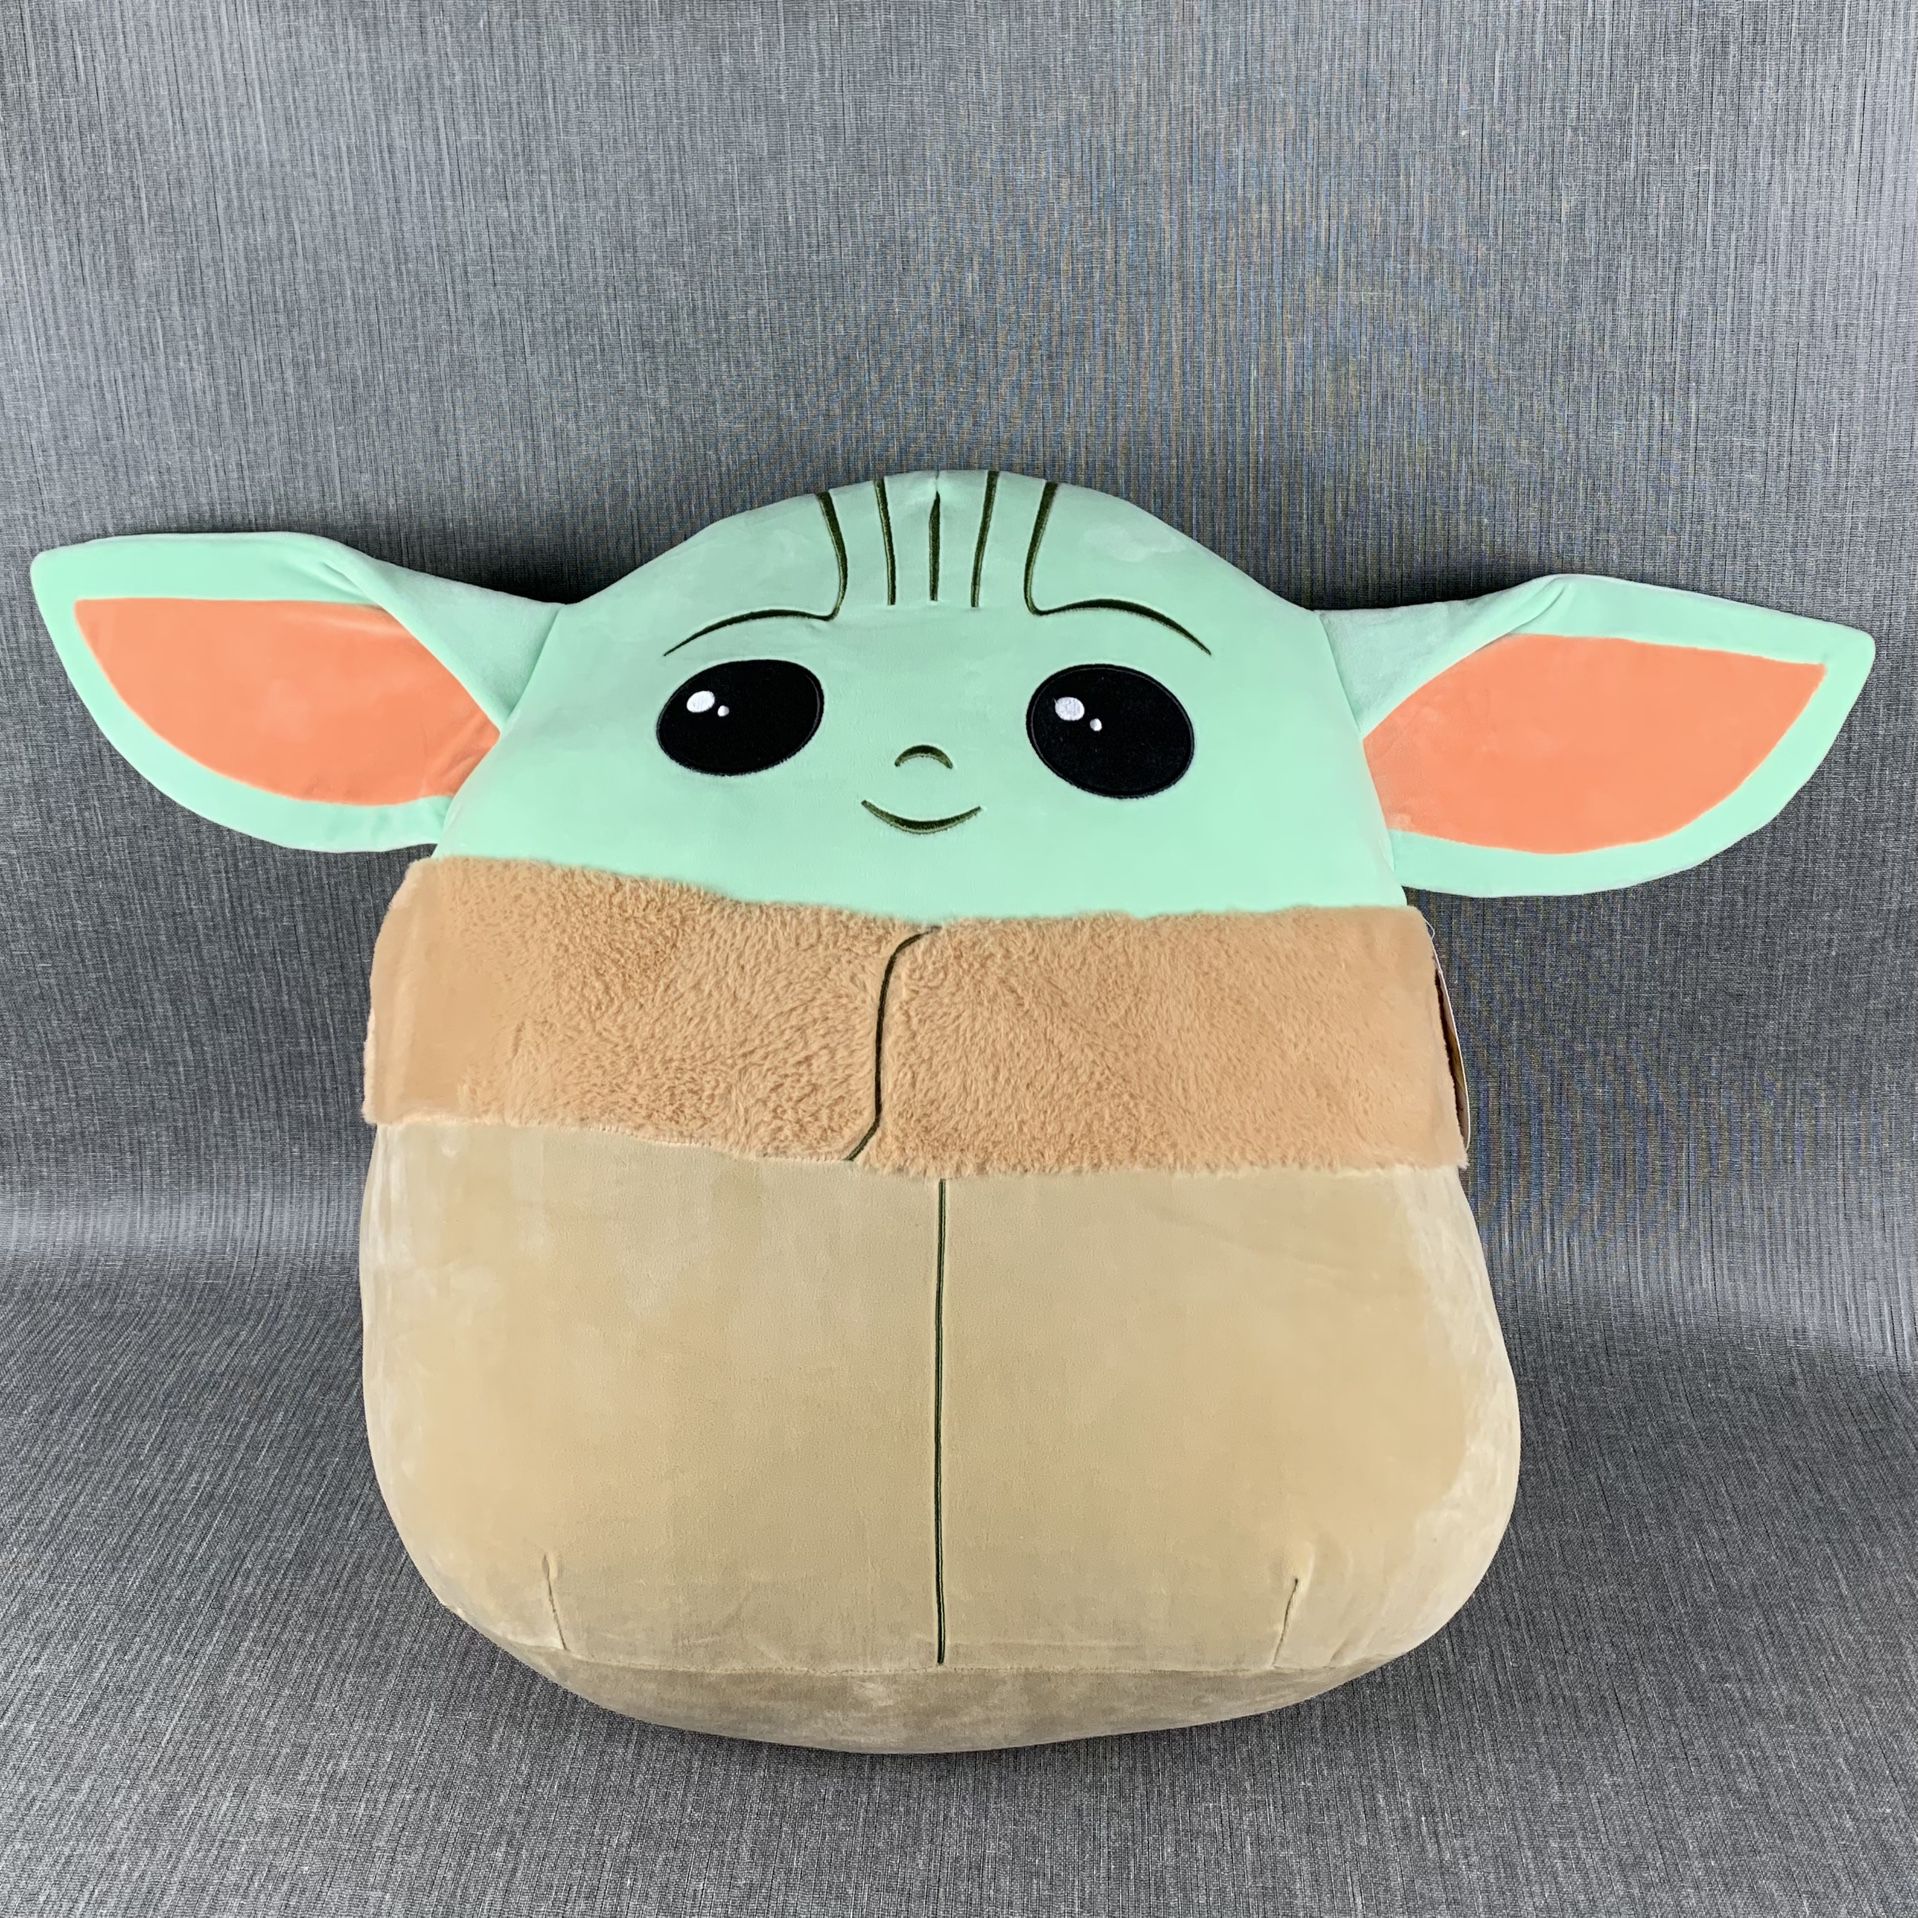 Brand new with tags 20" Disney The Child / Baby Yoda Squishmallow - Star Wars Mandalorian